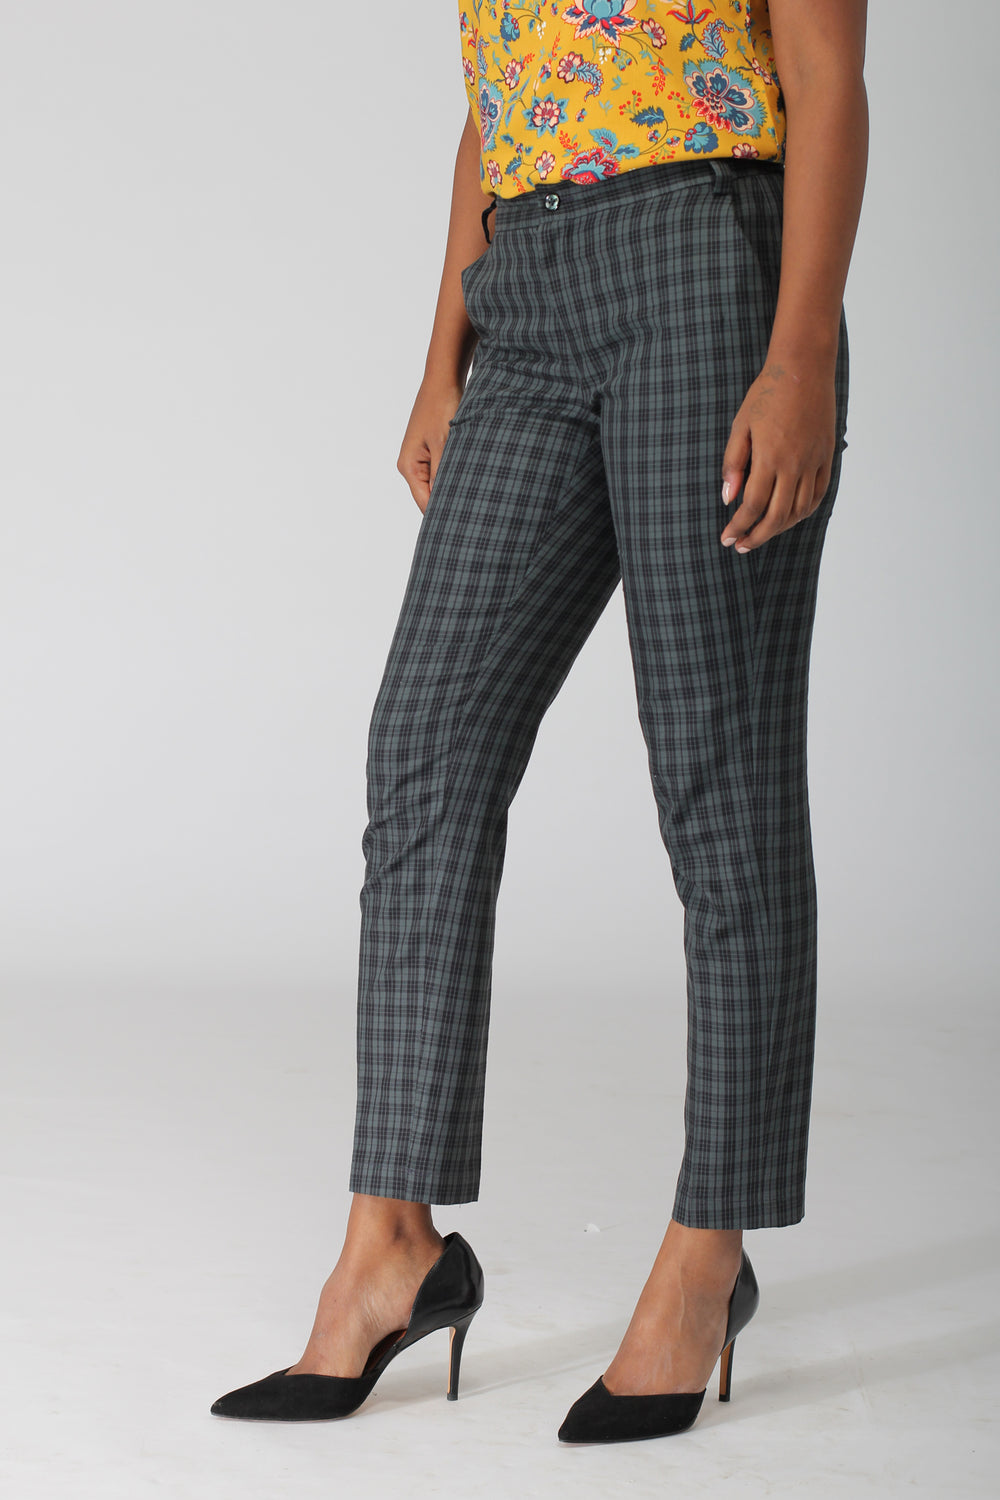 Good Life of Design: A FASHION POST: How To Wear Plaid Pants